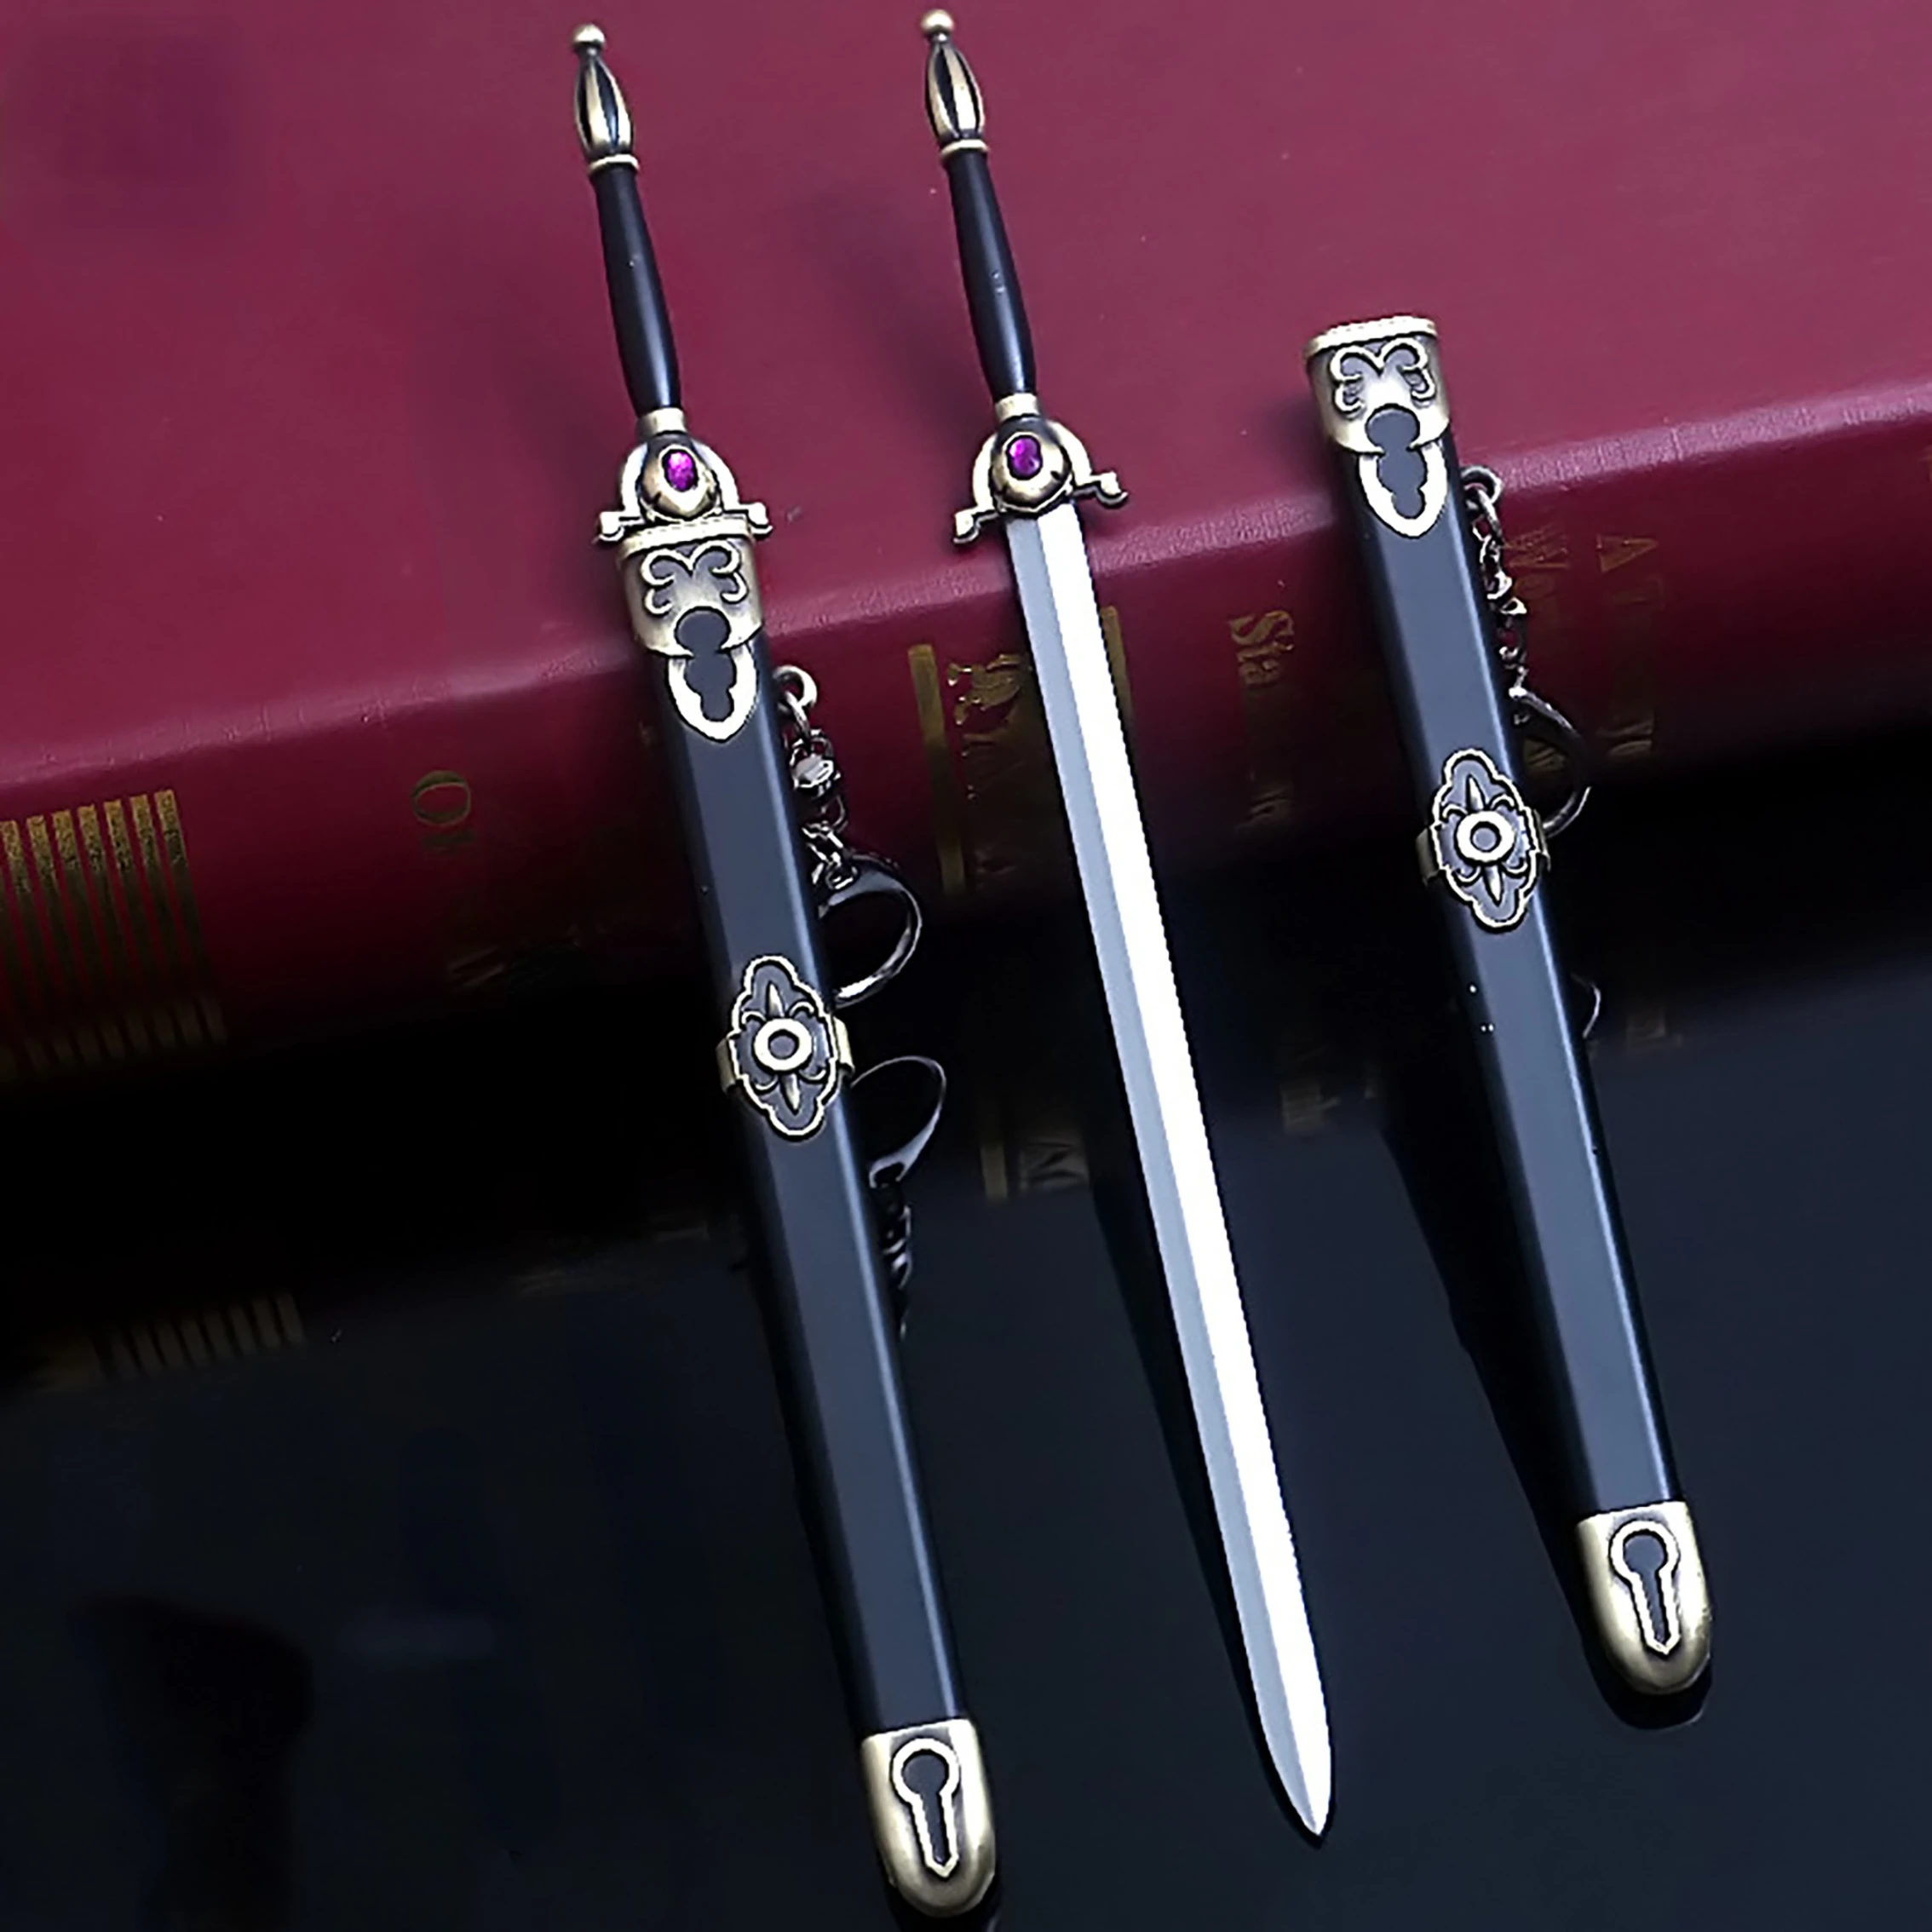 Fate Night Surrounding Fate Lanling King Sword Alloy Model 22cm Sword Ornaments Metal Die Casting Mini Toy Ornaments Collection